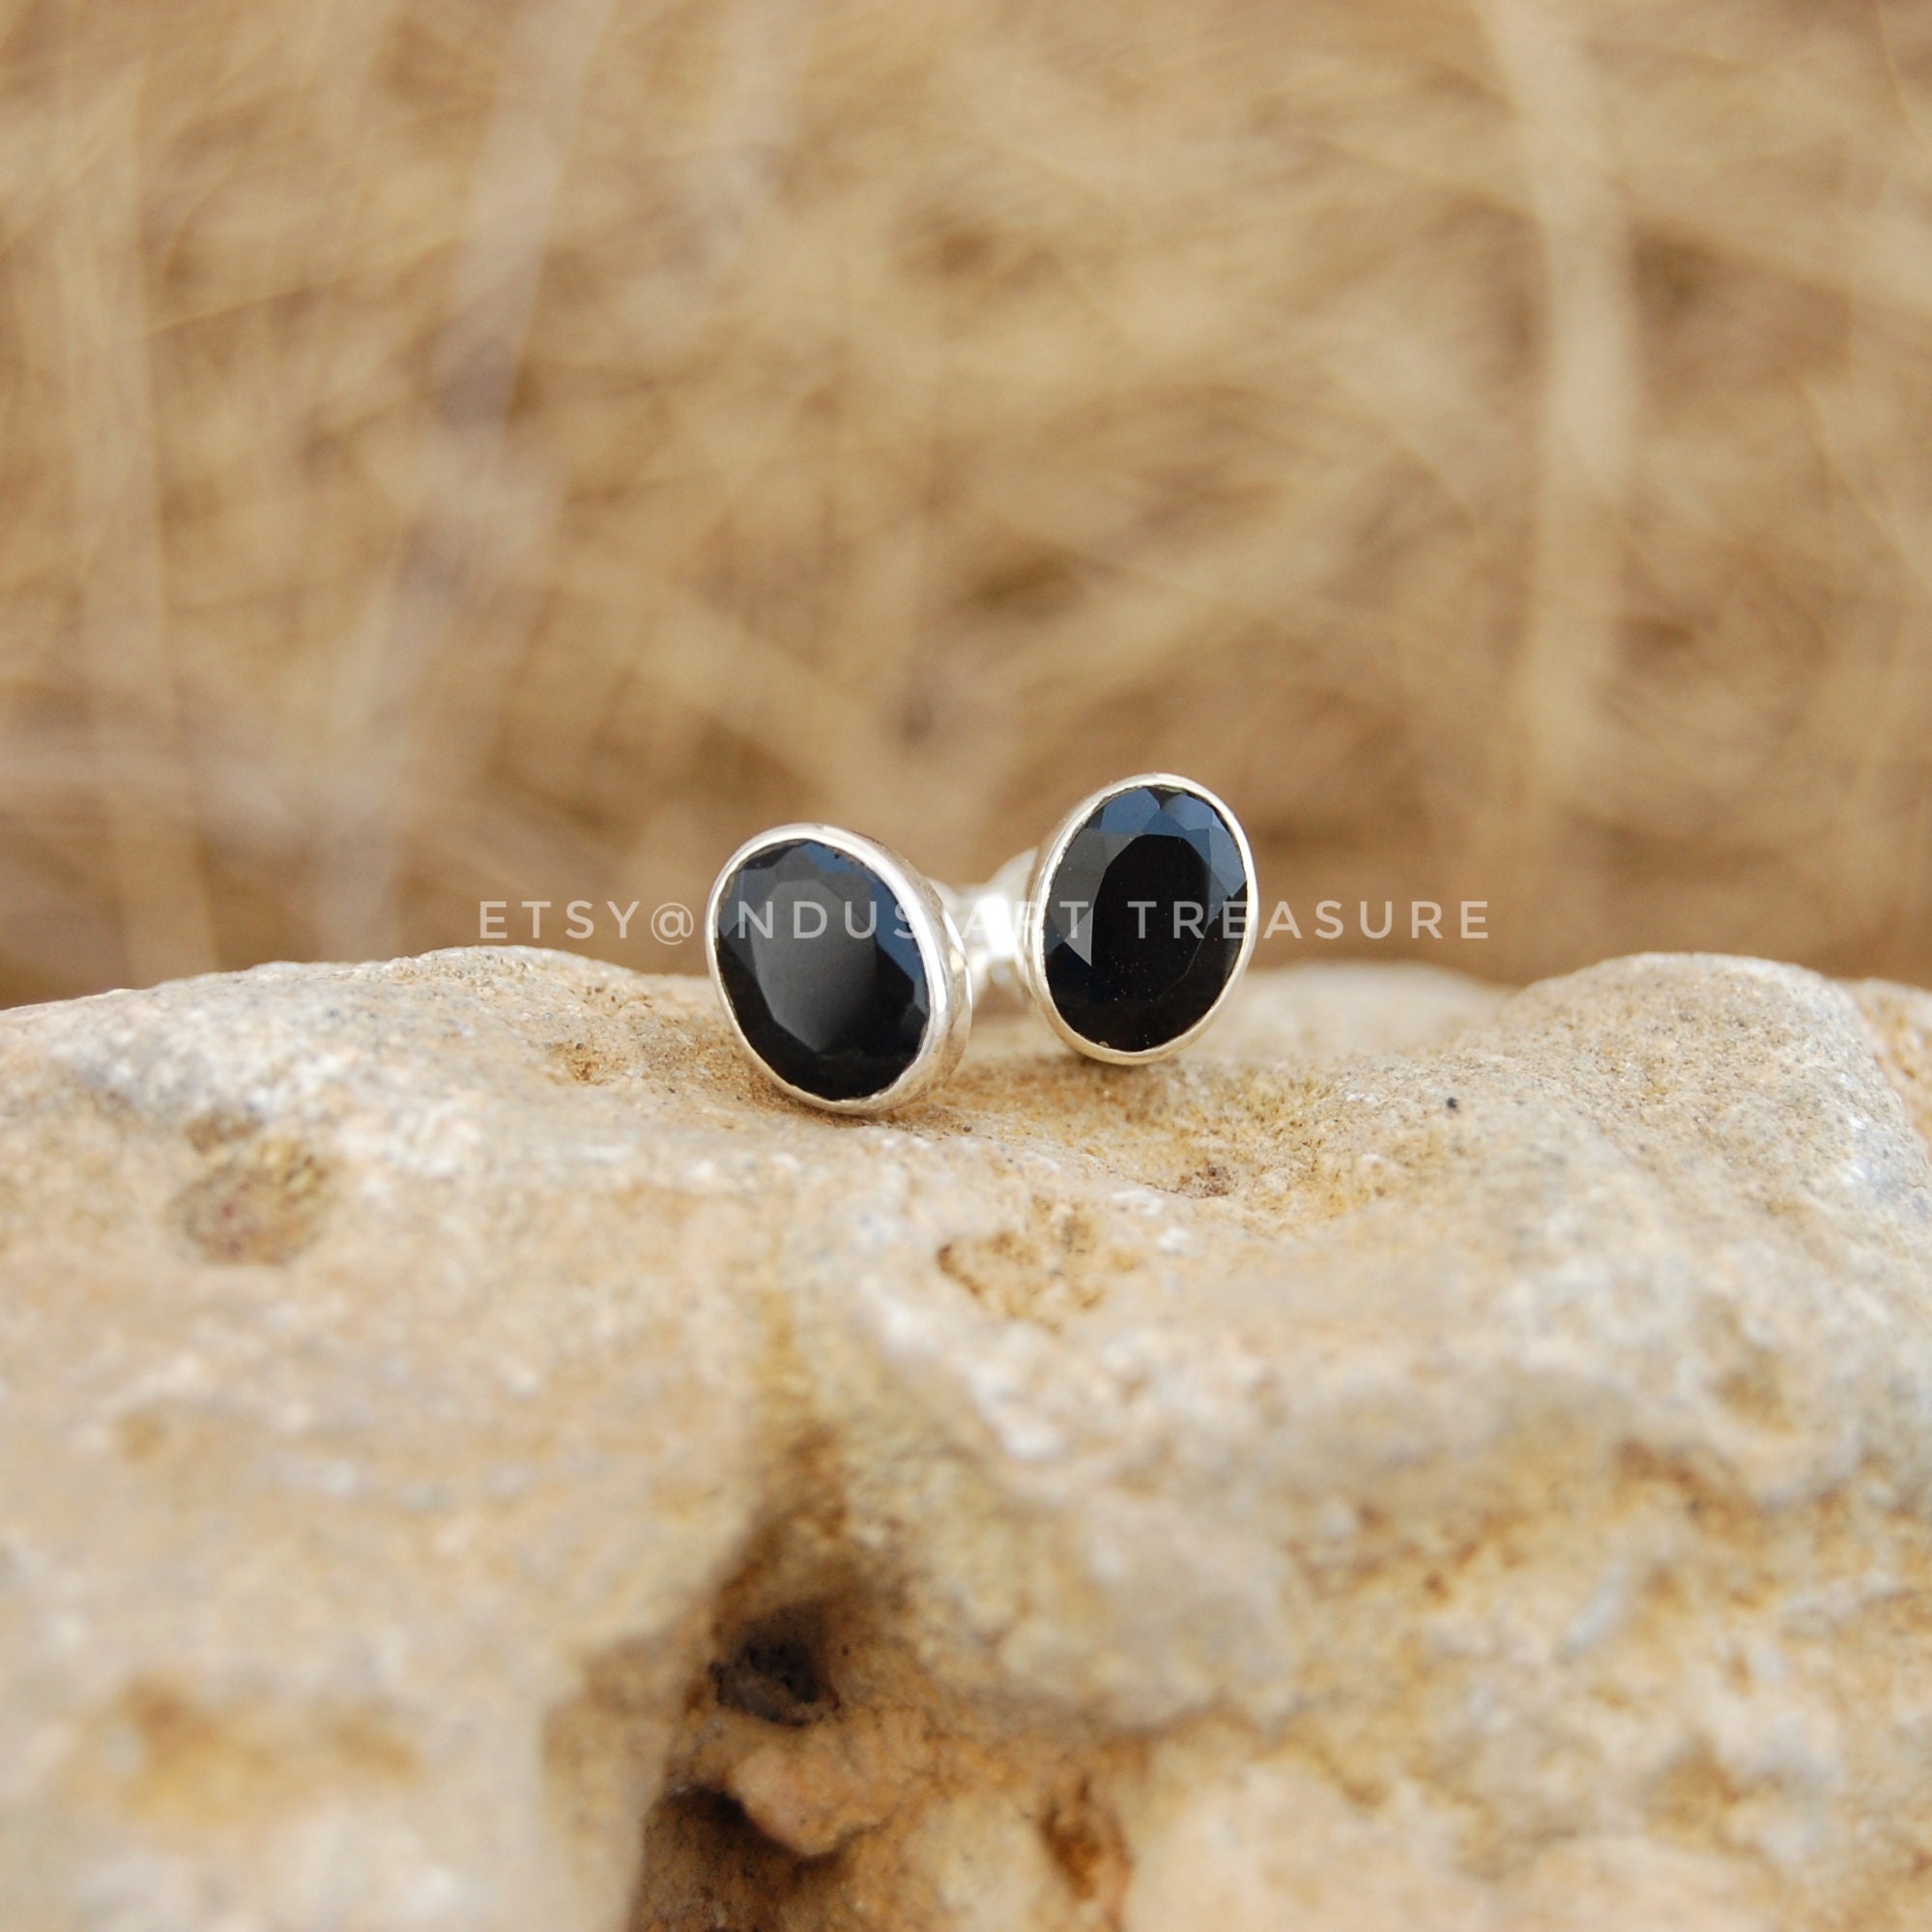 Details about   Black Onyx Gemstone 925 Sterling Silver Ball Design Stud Earrings Jewelry 